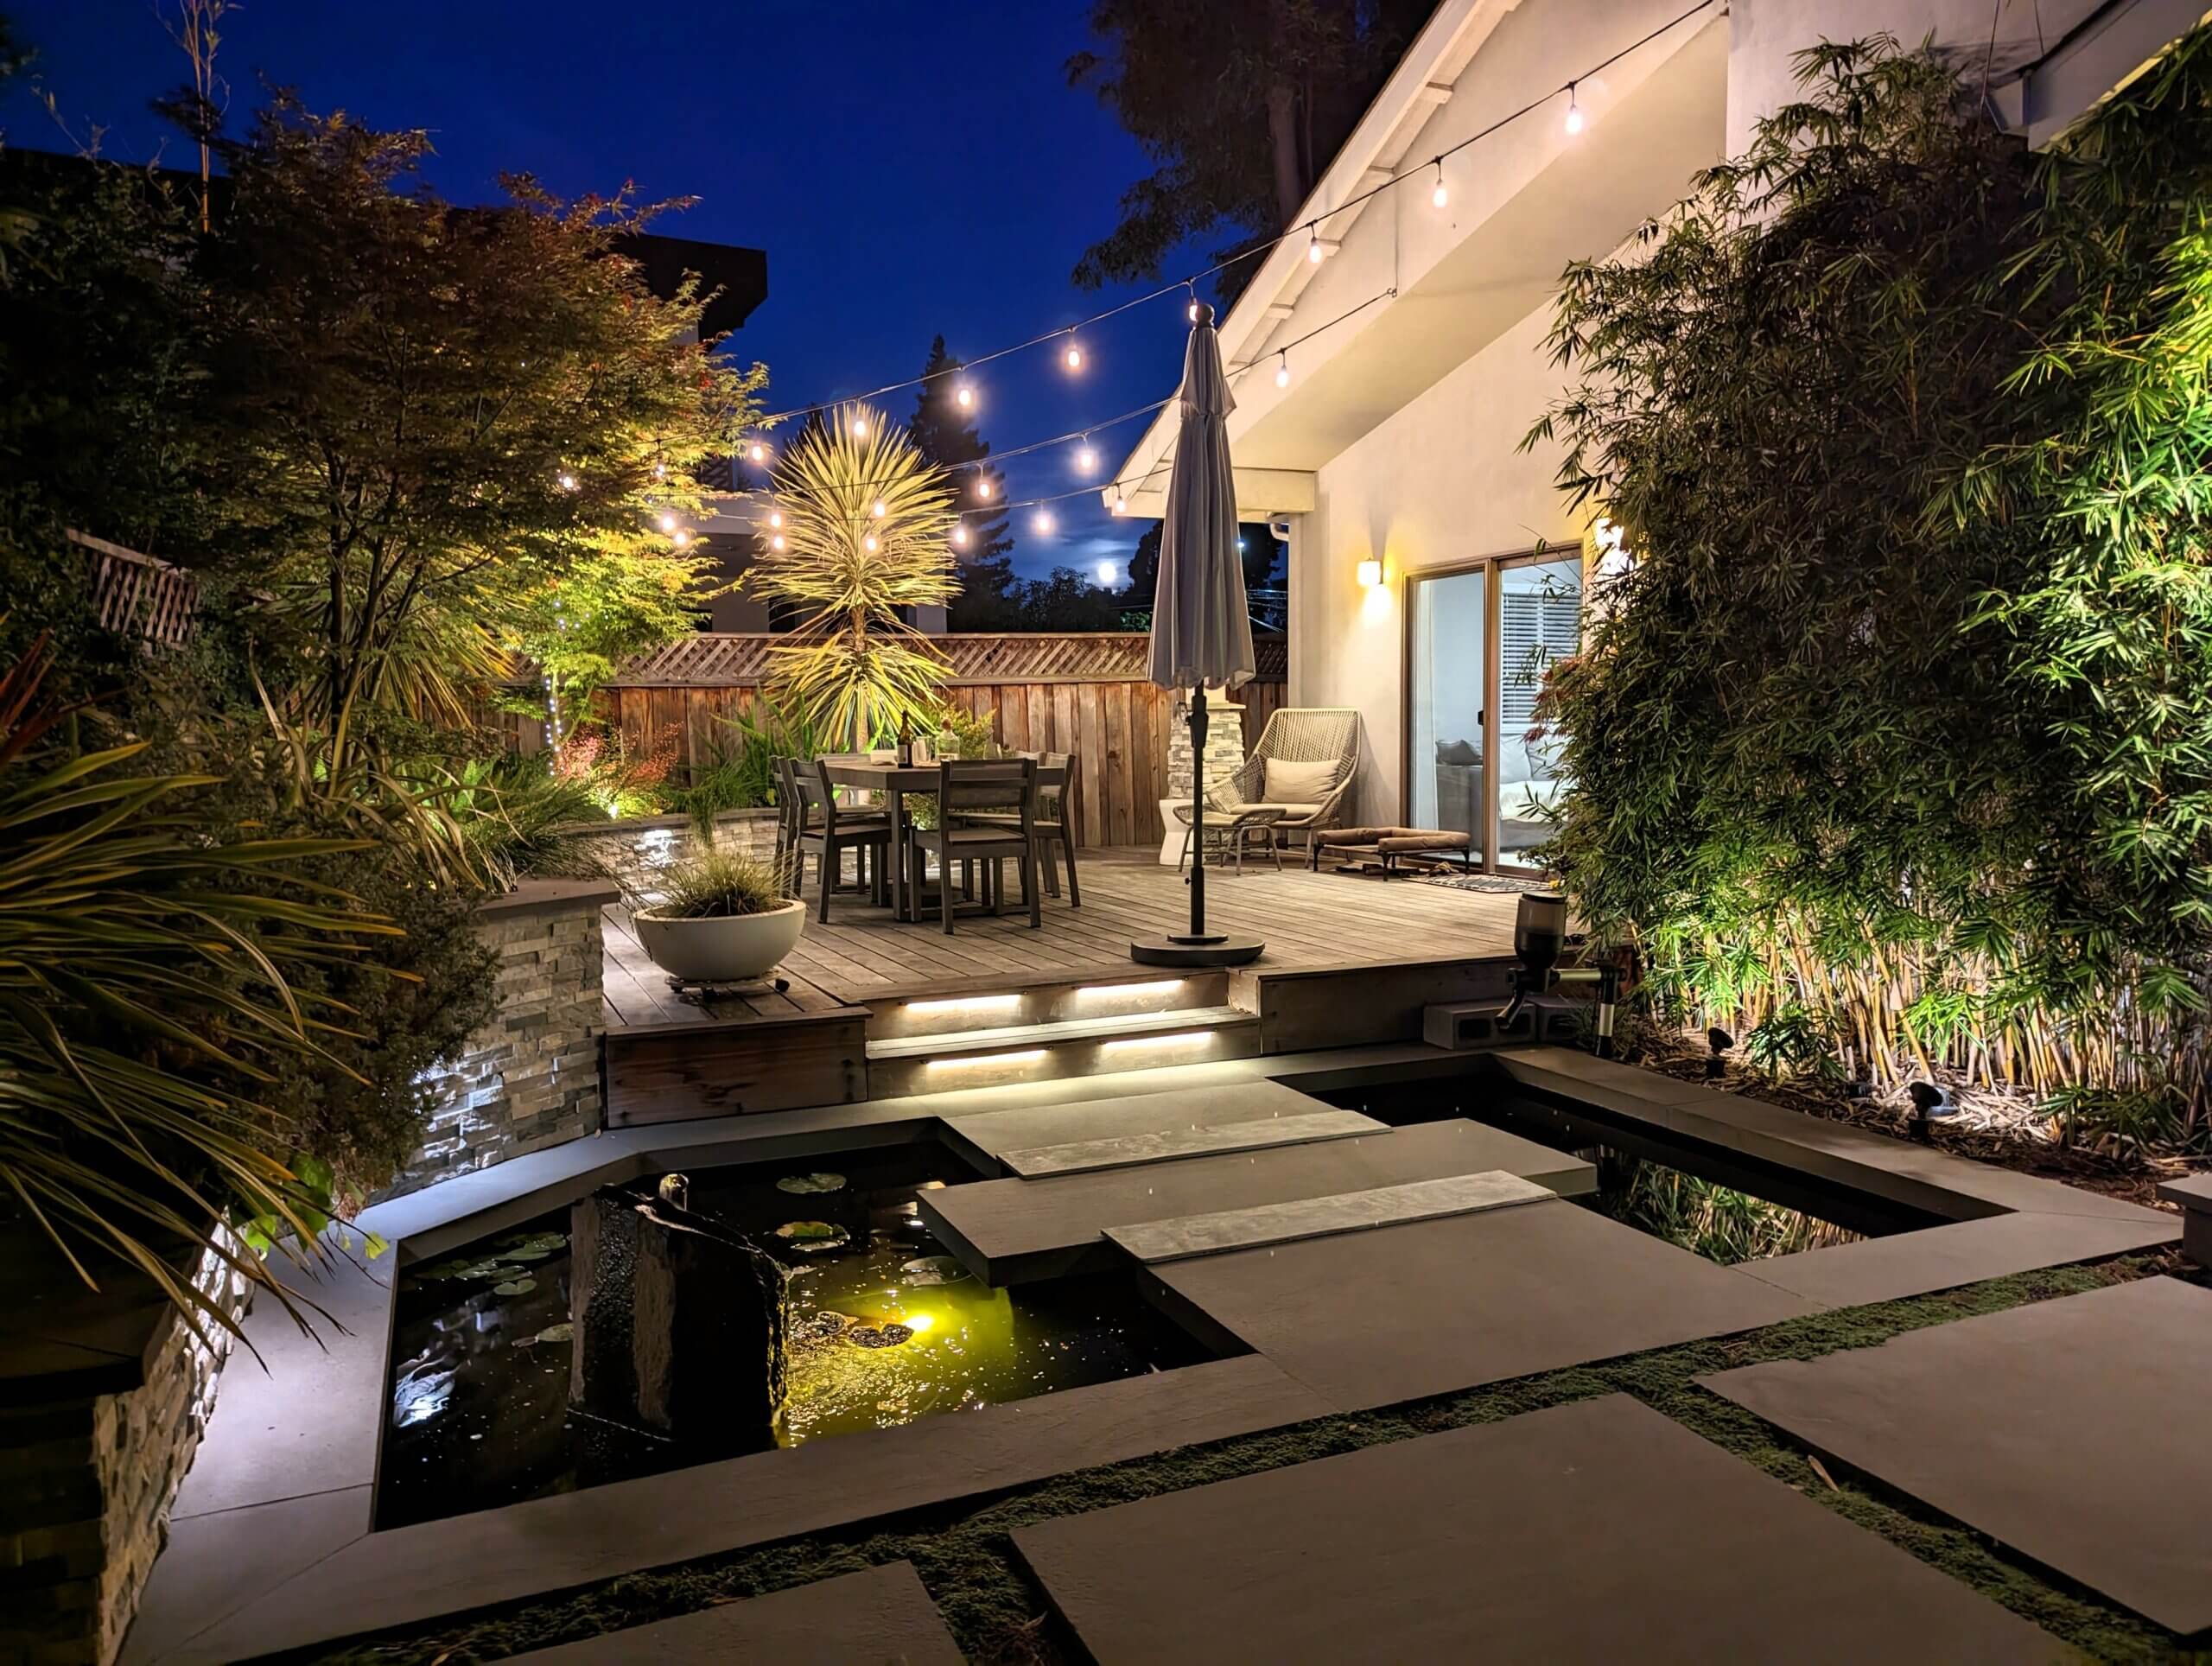 View of backyard zen landscape at night with grown bamboo alongside koi pond